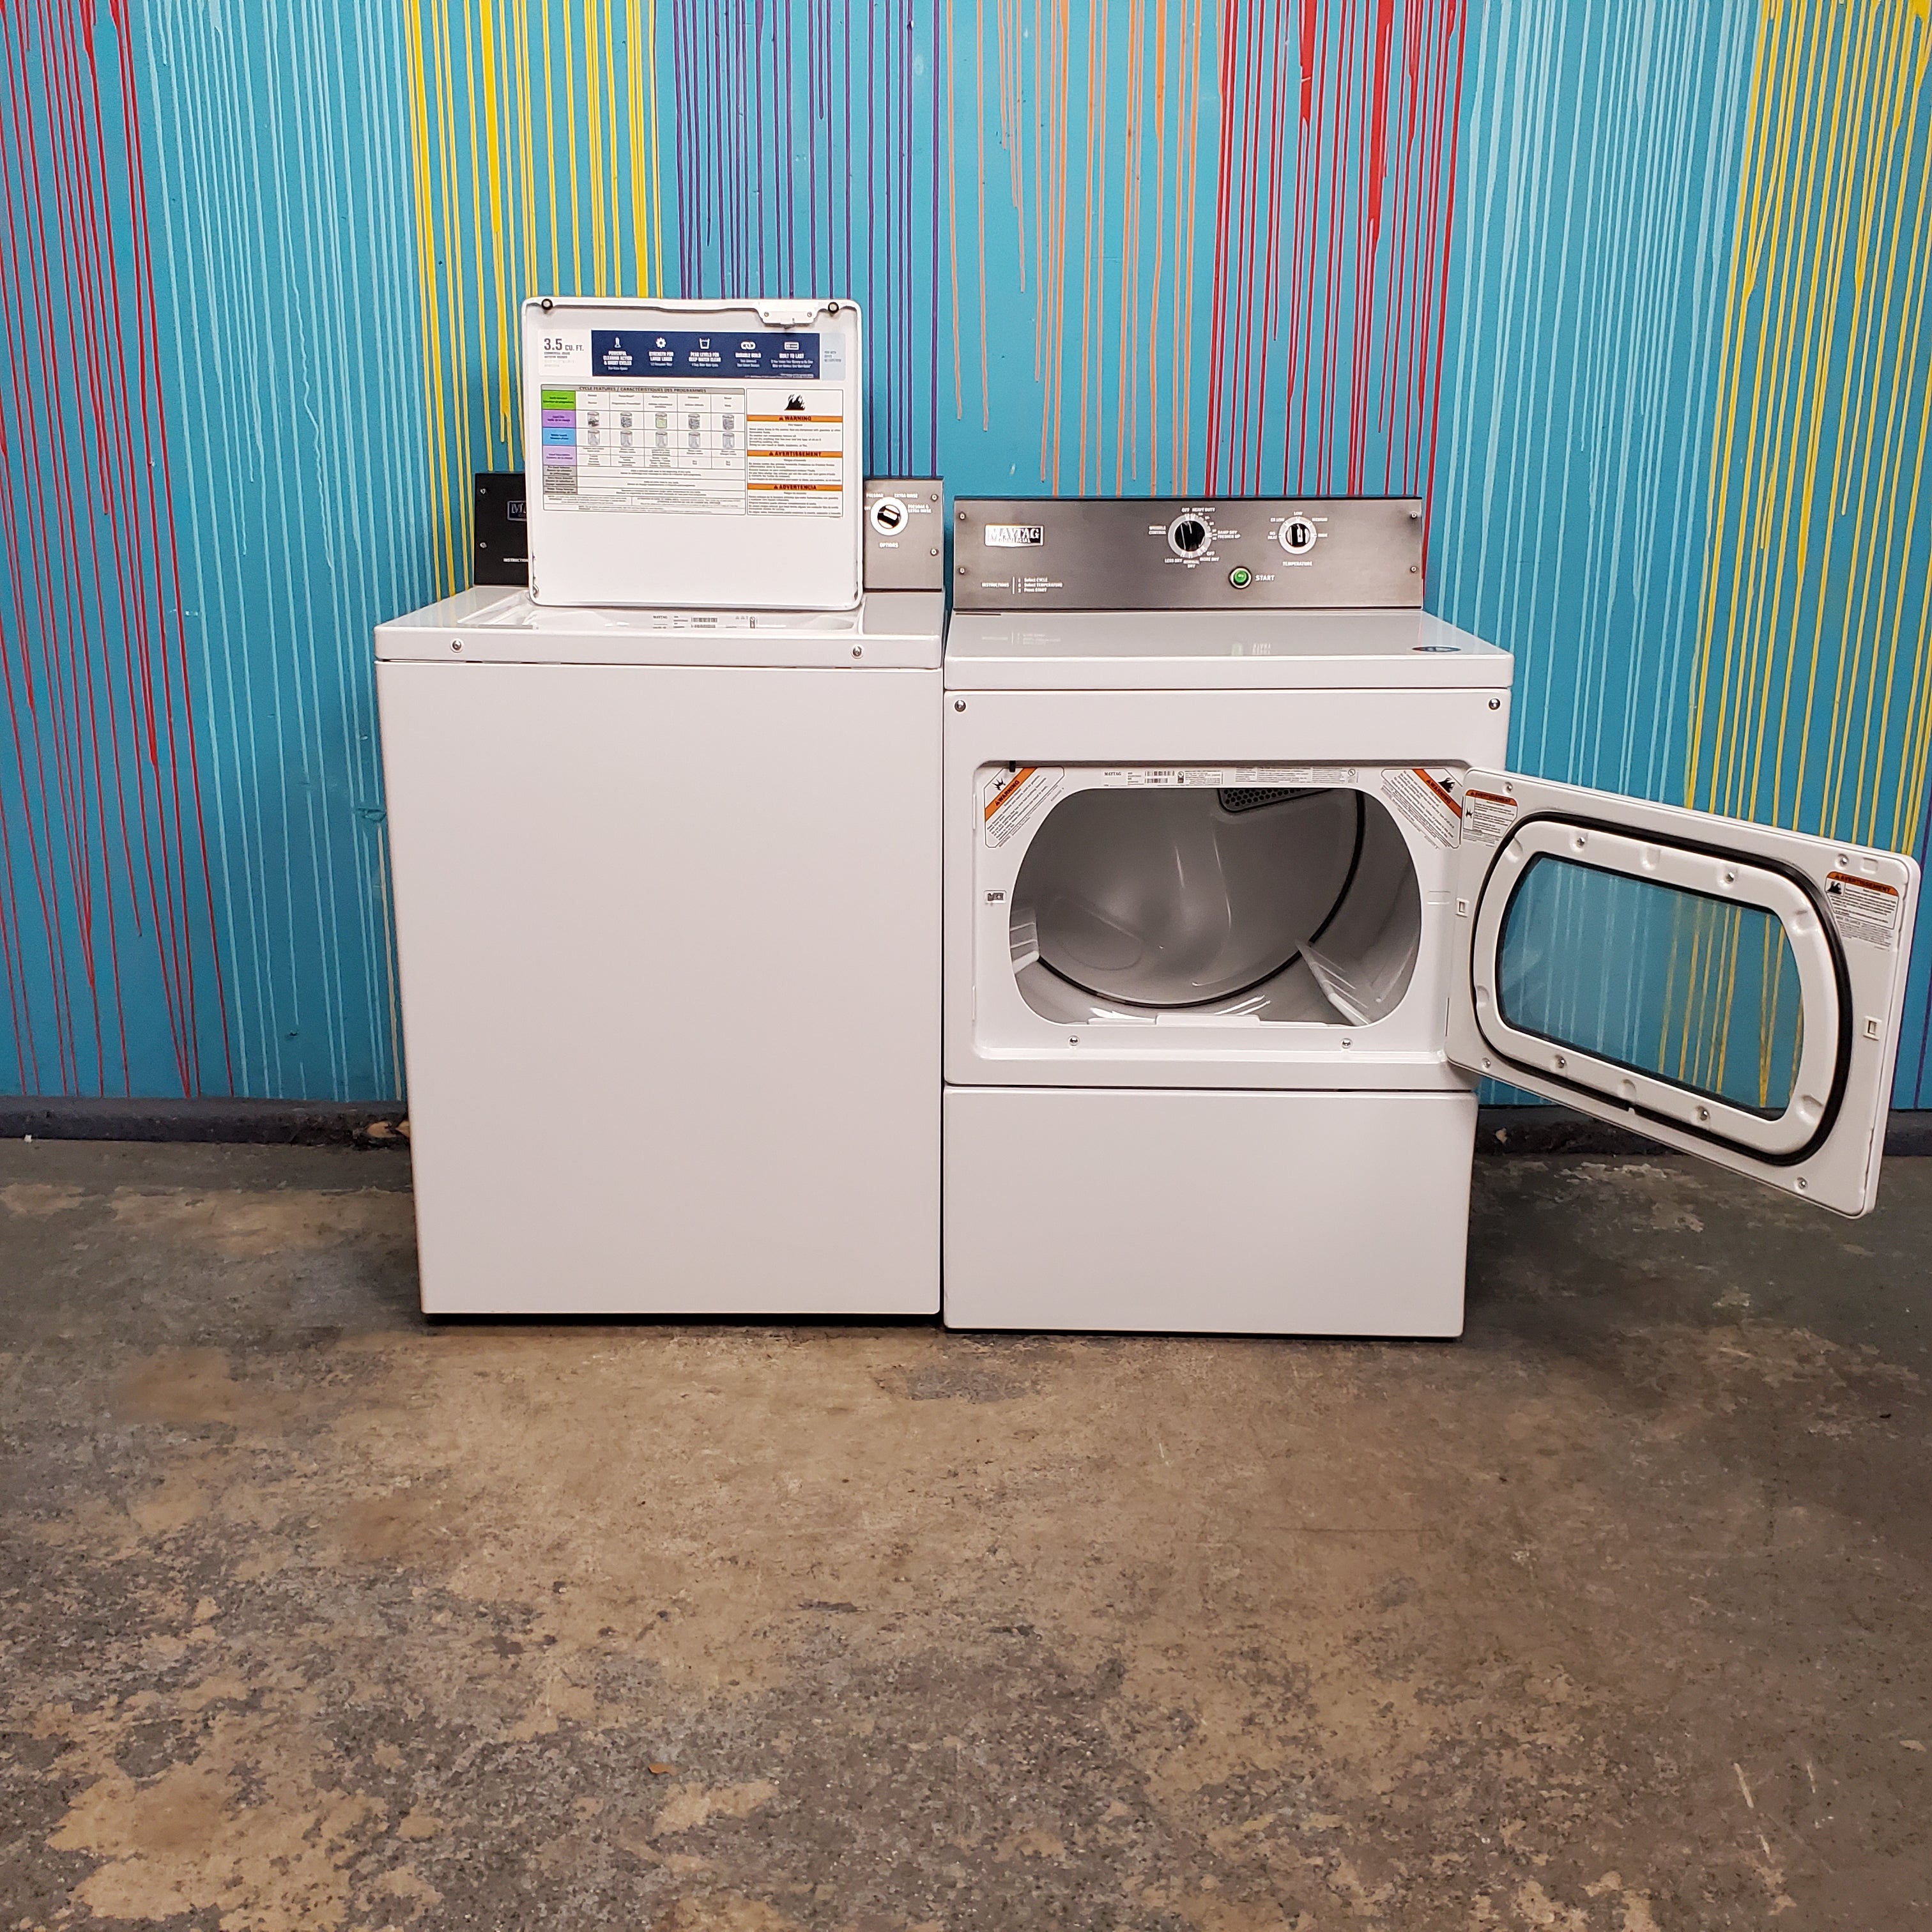 Pictures of Maytag 3.5 cu. ft. Smart Capable Top Load Washing Machine  and Maytag  7.4 cu. ft. Gas Dryer with Extra Power Button - Scratch & Dent - Minor - Neu Appliance Outlet - Discount Appliance Outlet in Austin, Tx